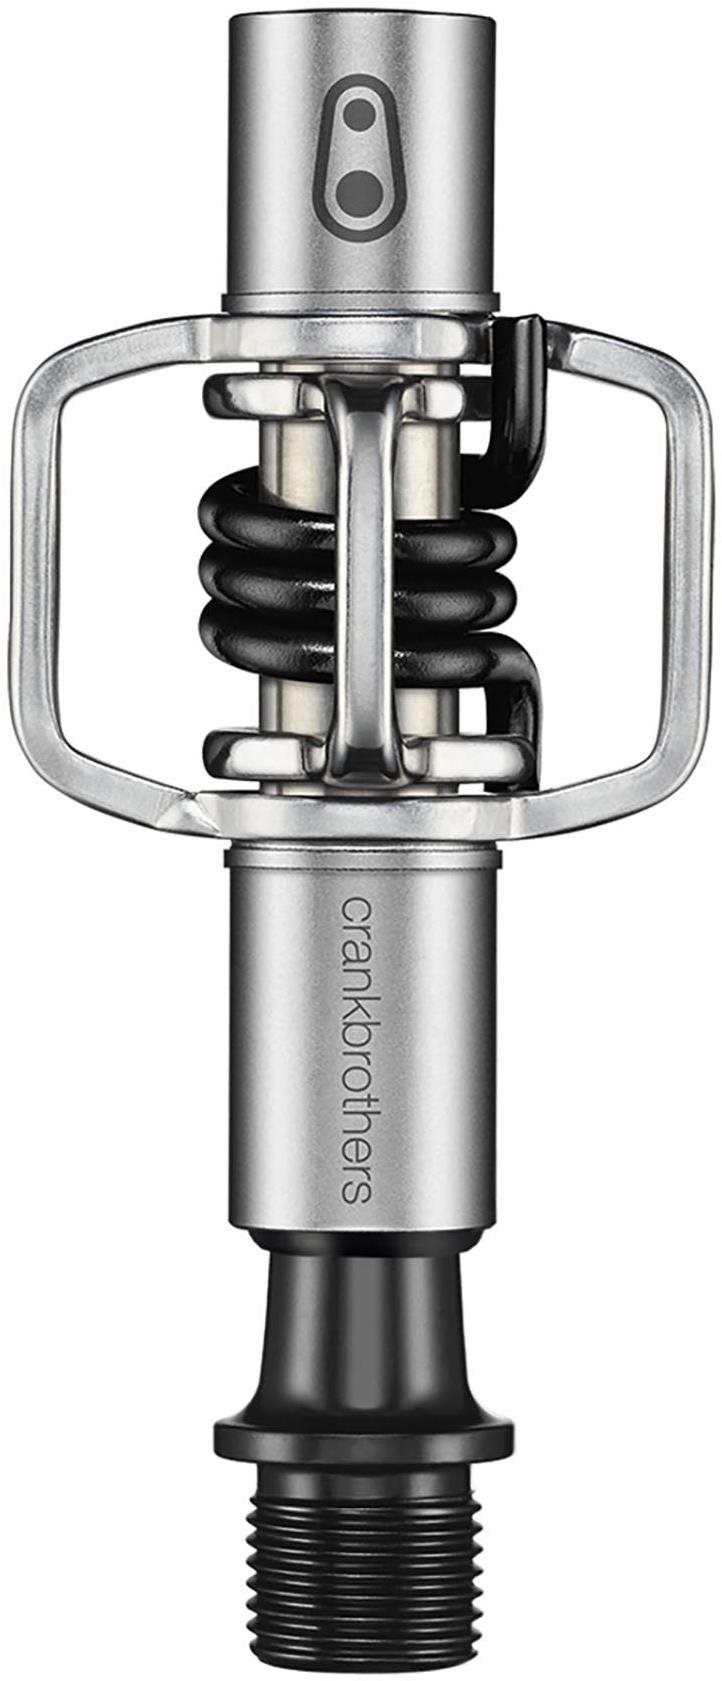 Pedál Crankbrothers Egg Beater 1 Silver